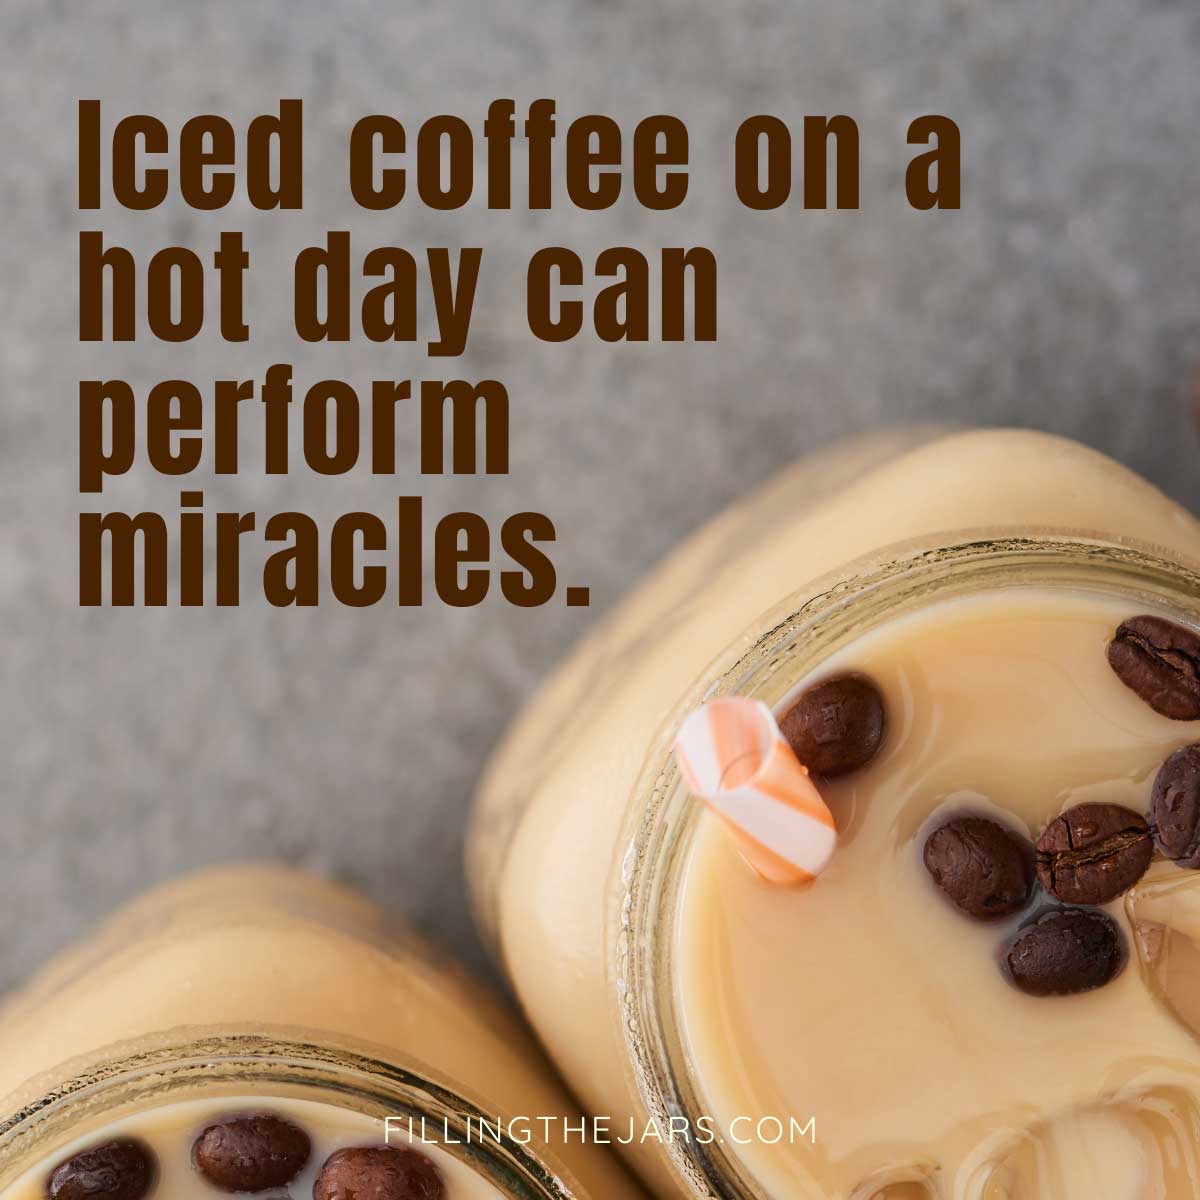 Iced coffee on a hot day quote in bold brown text on background of iced coffee in glass mugs on gray counter.